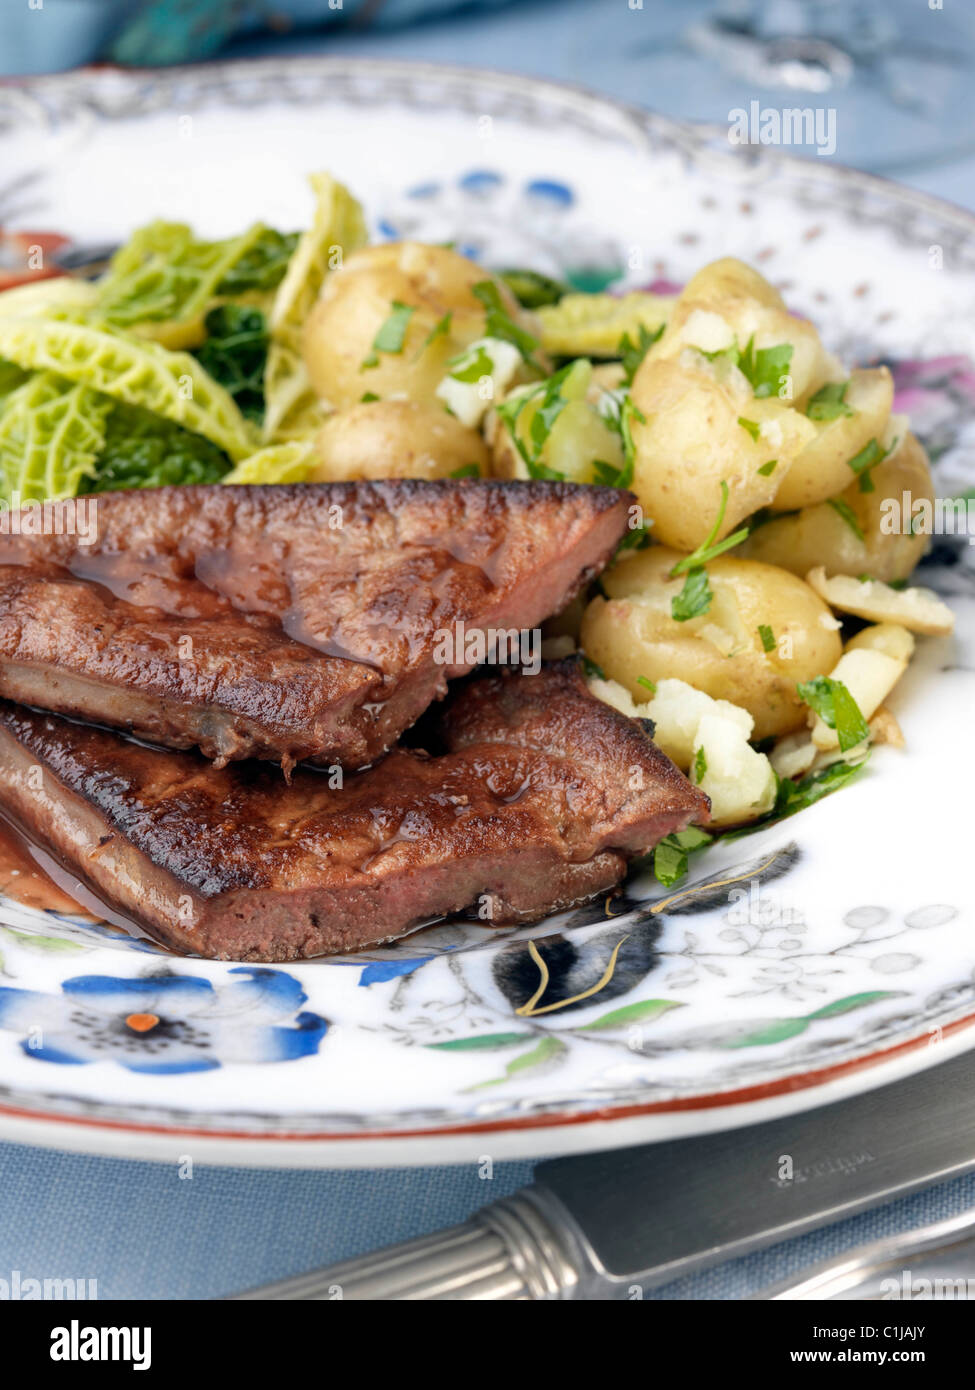 Calves liver with cabbage and potatoes Stock Photo